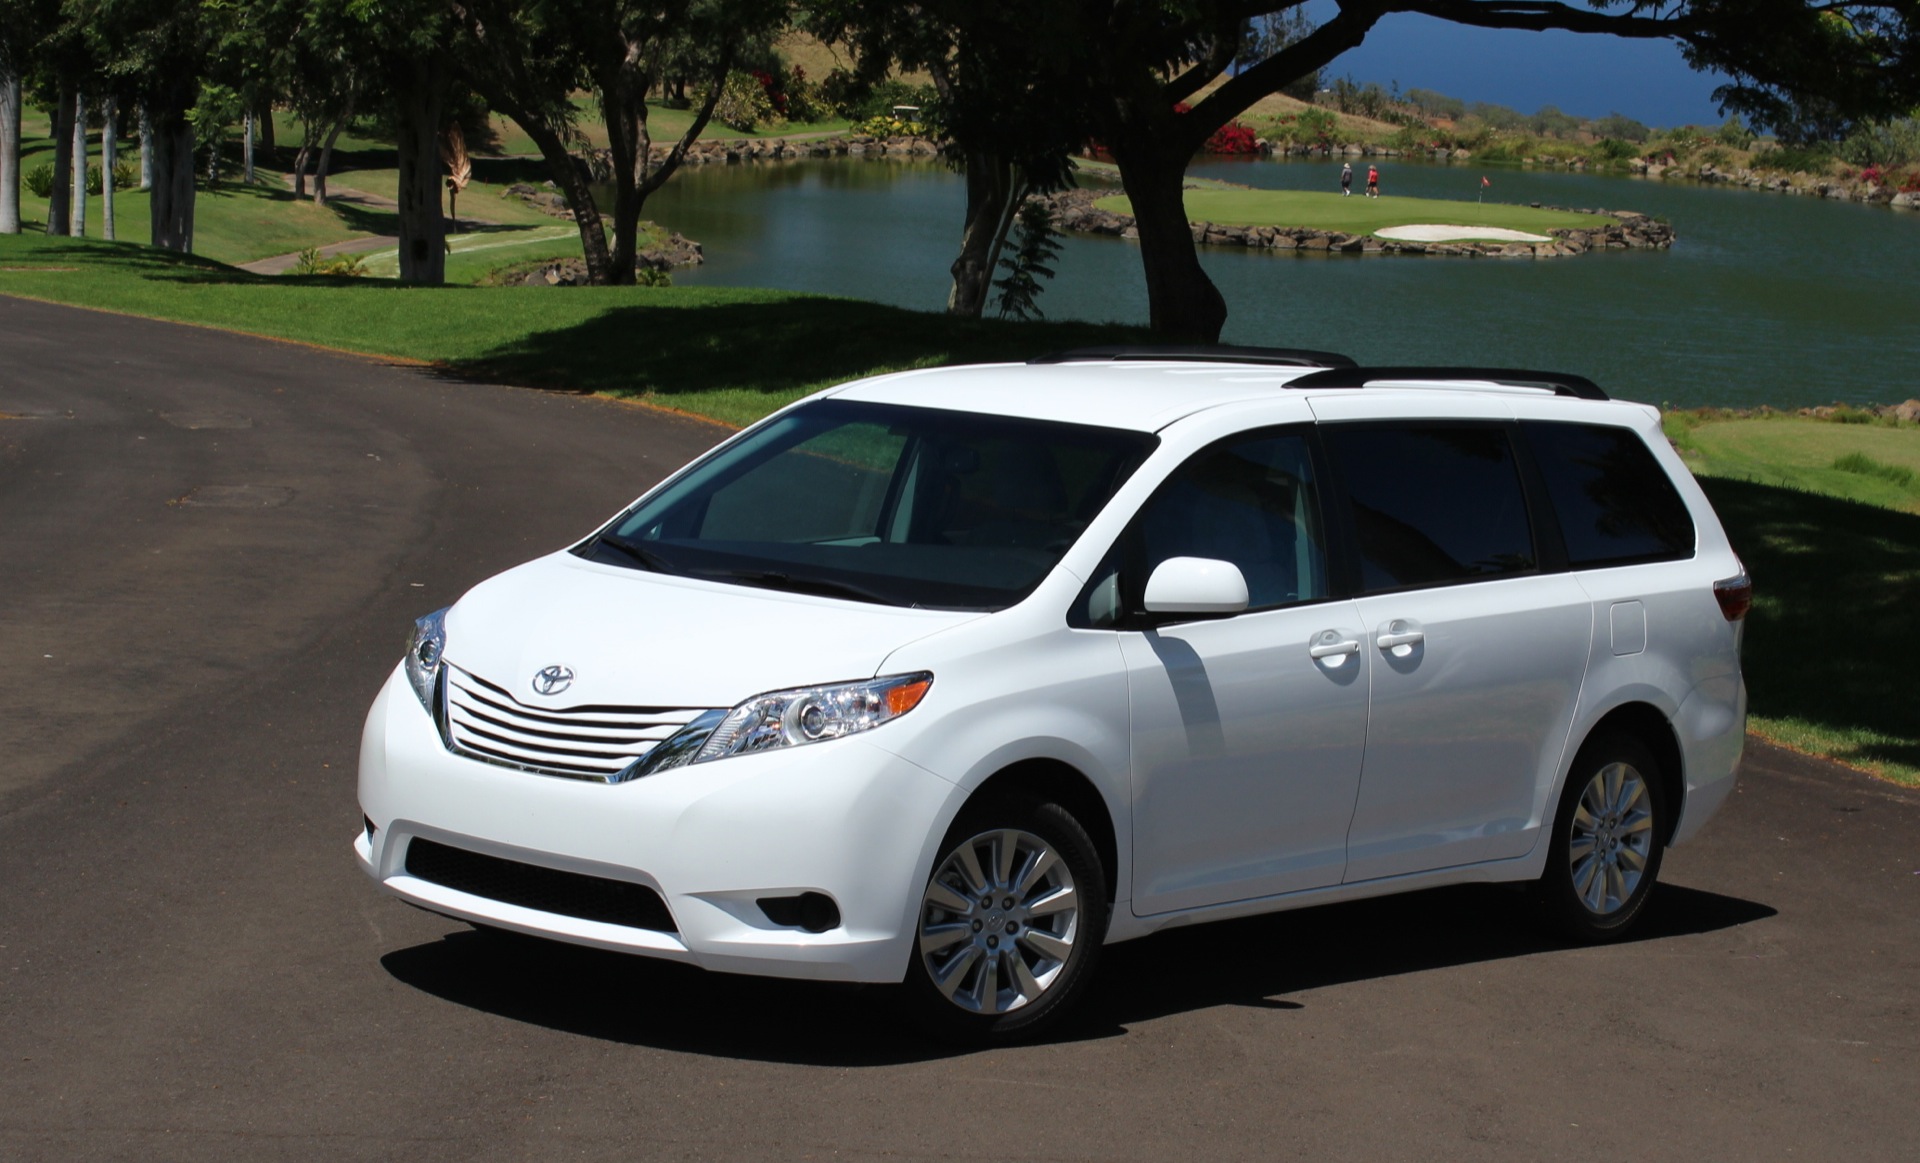 Compare used honda odyssey and toyota sienna #4